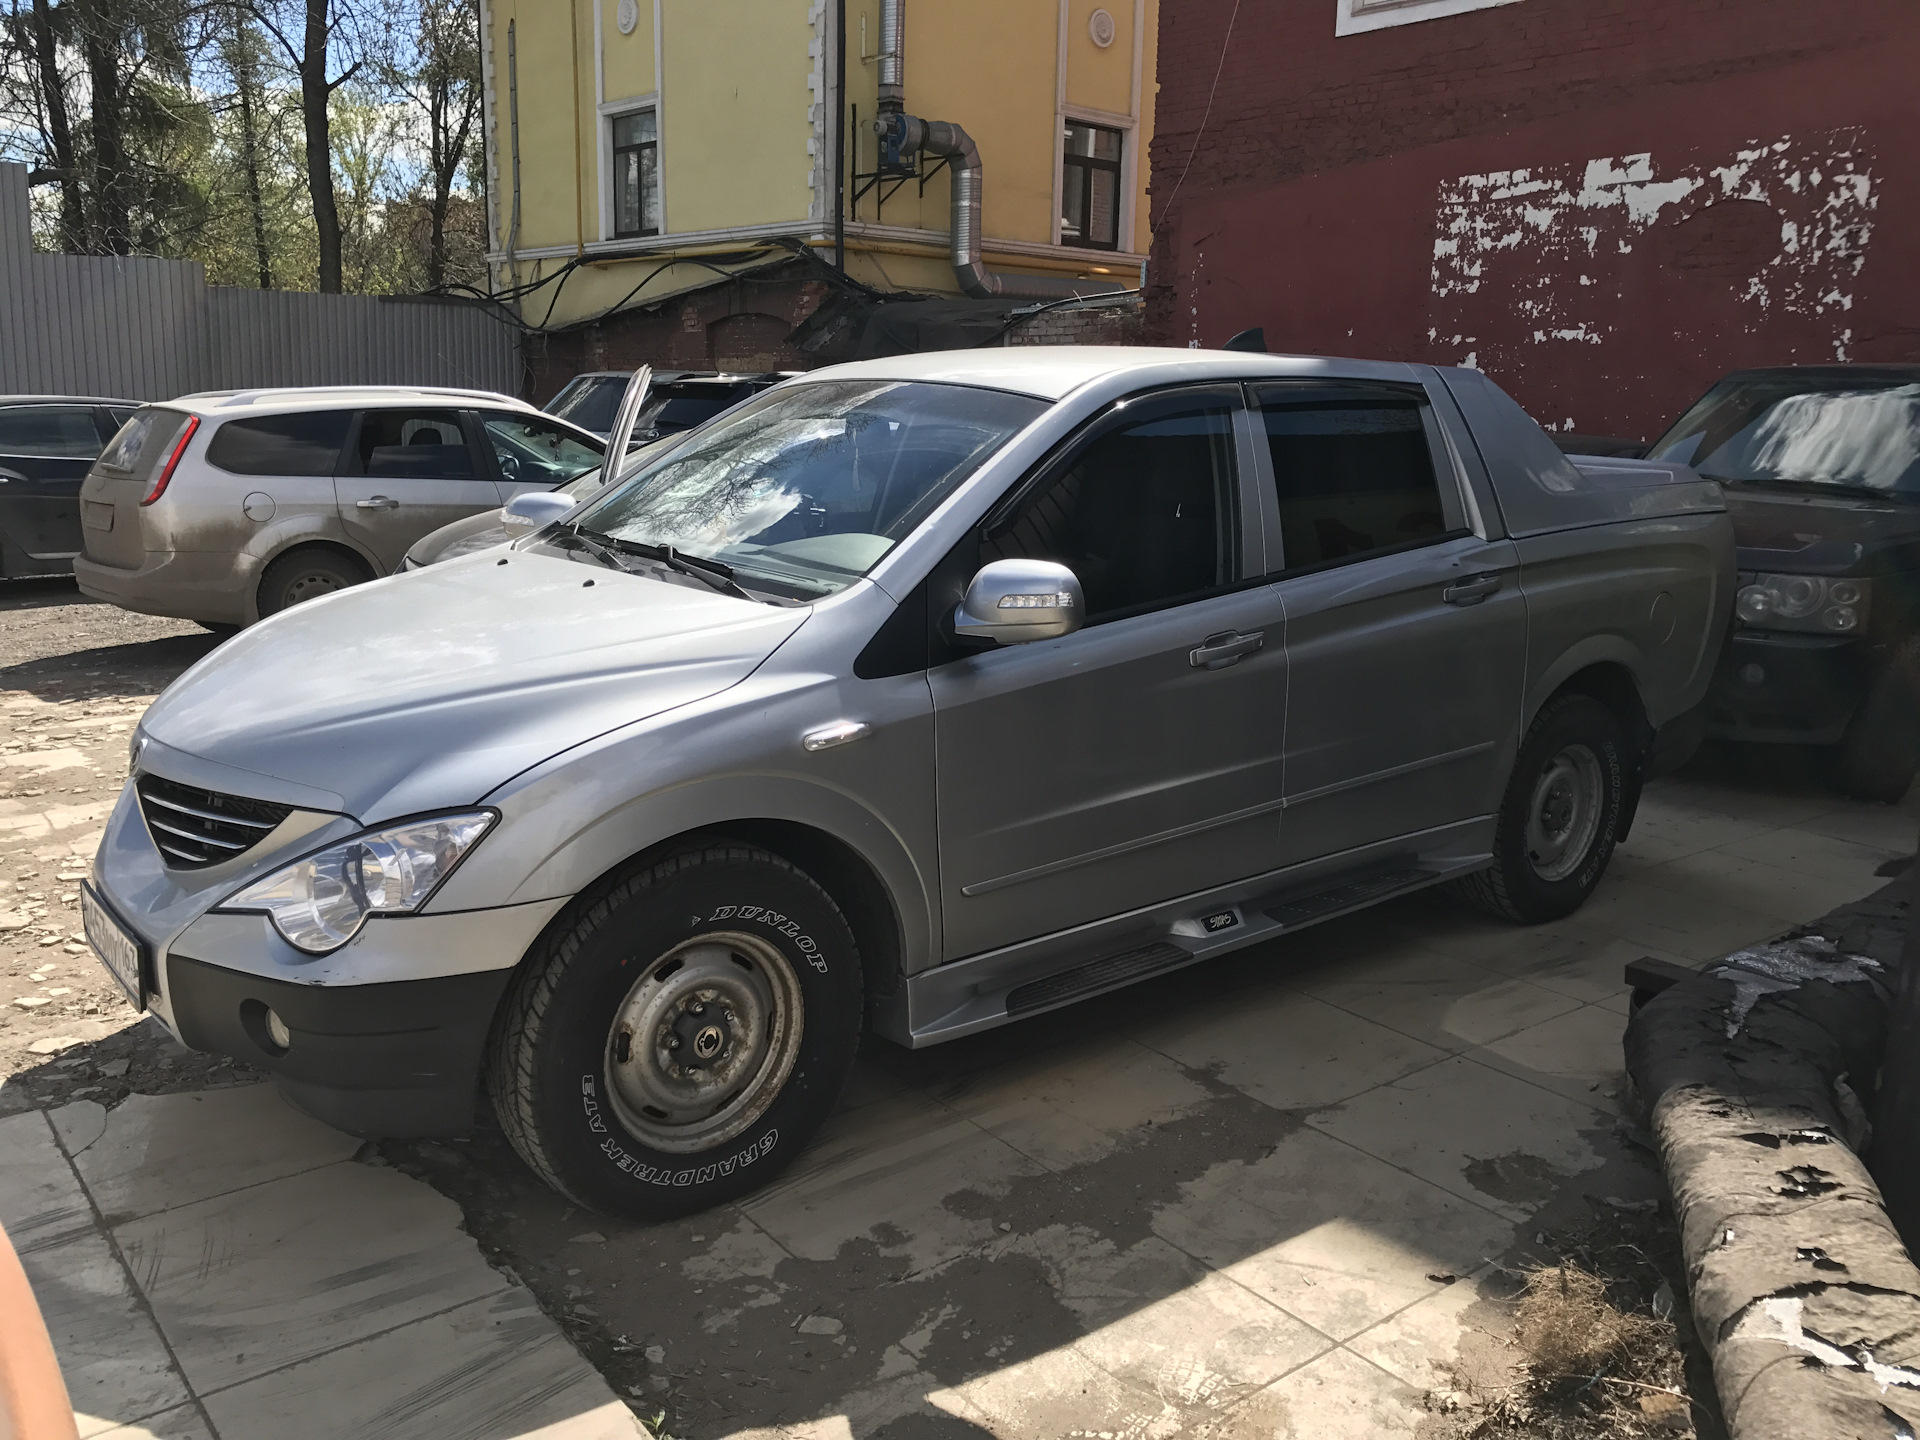 Ssangyong actyon sports двигателя. SSANGYONG Actyon Sports 2008. SSANGYONG Actyon Sports 2008 обвес. SSANGYONG Actyon Sports к770мр134. Фендеры SSANGYONG Actyon.